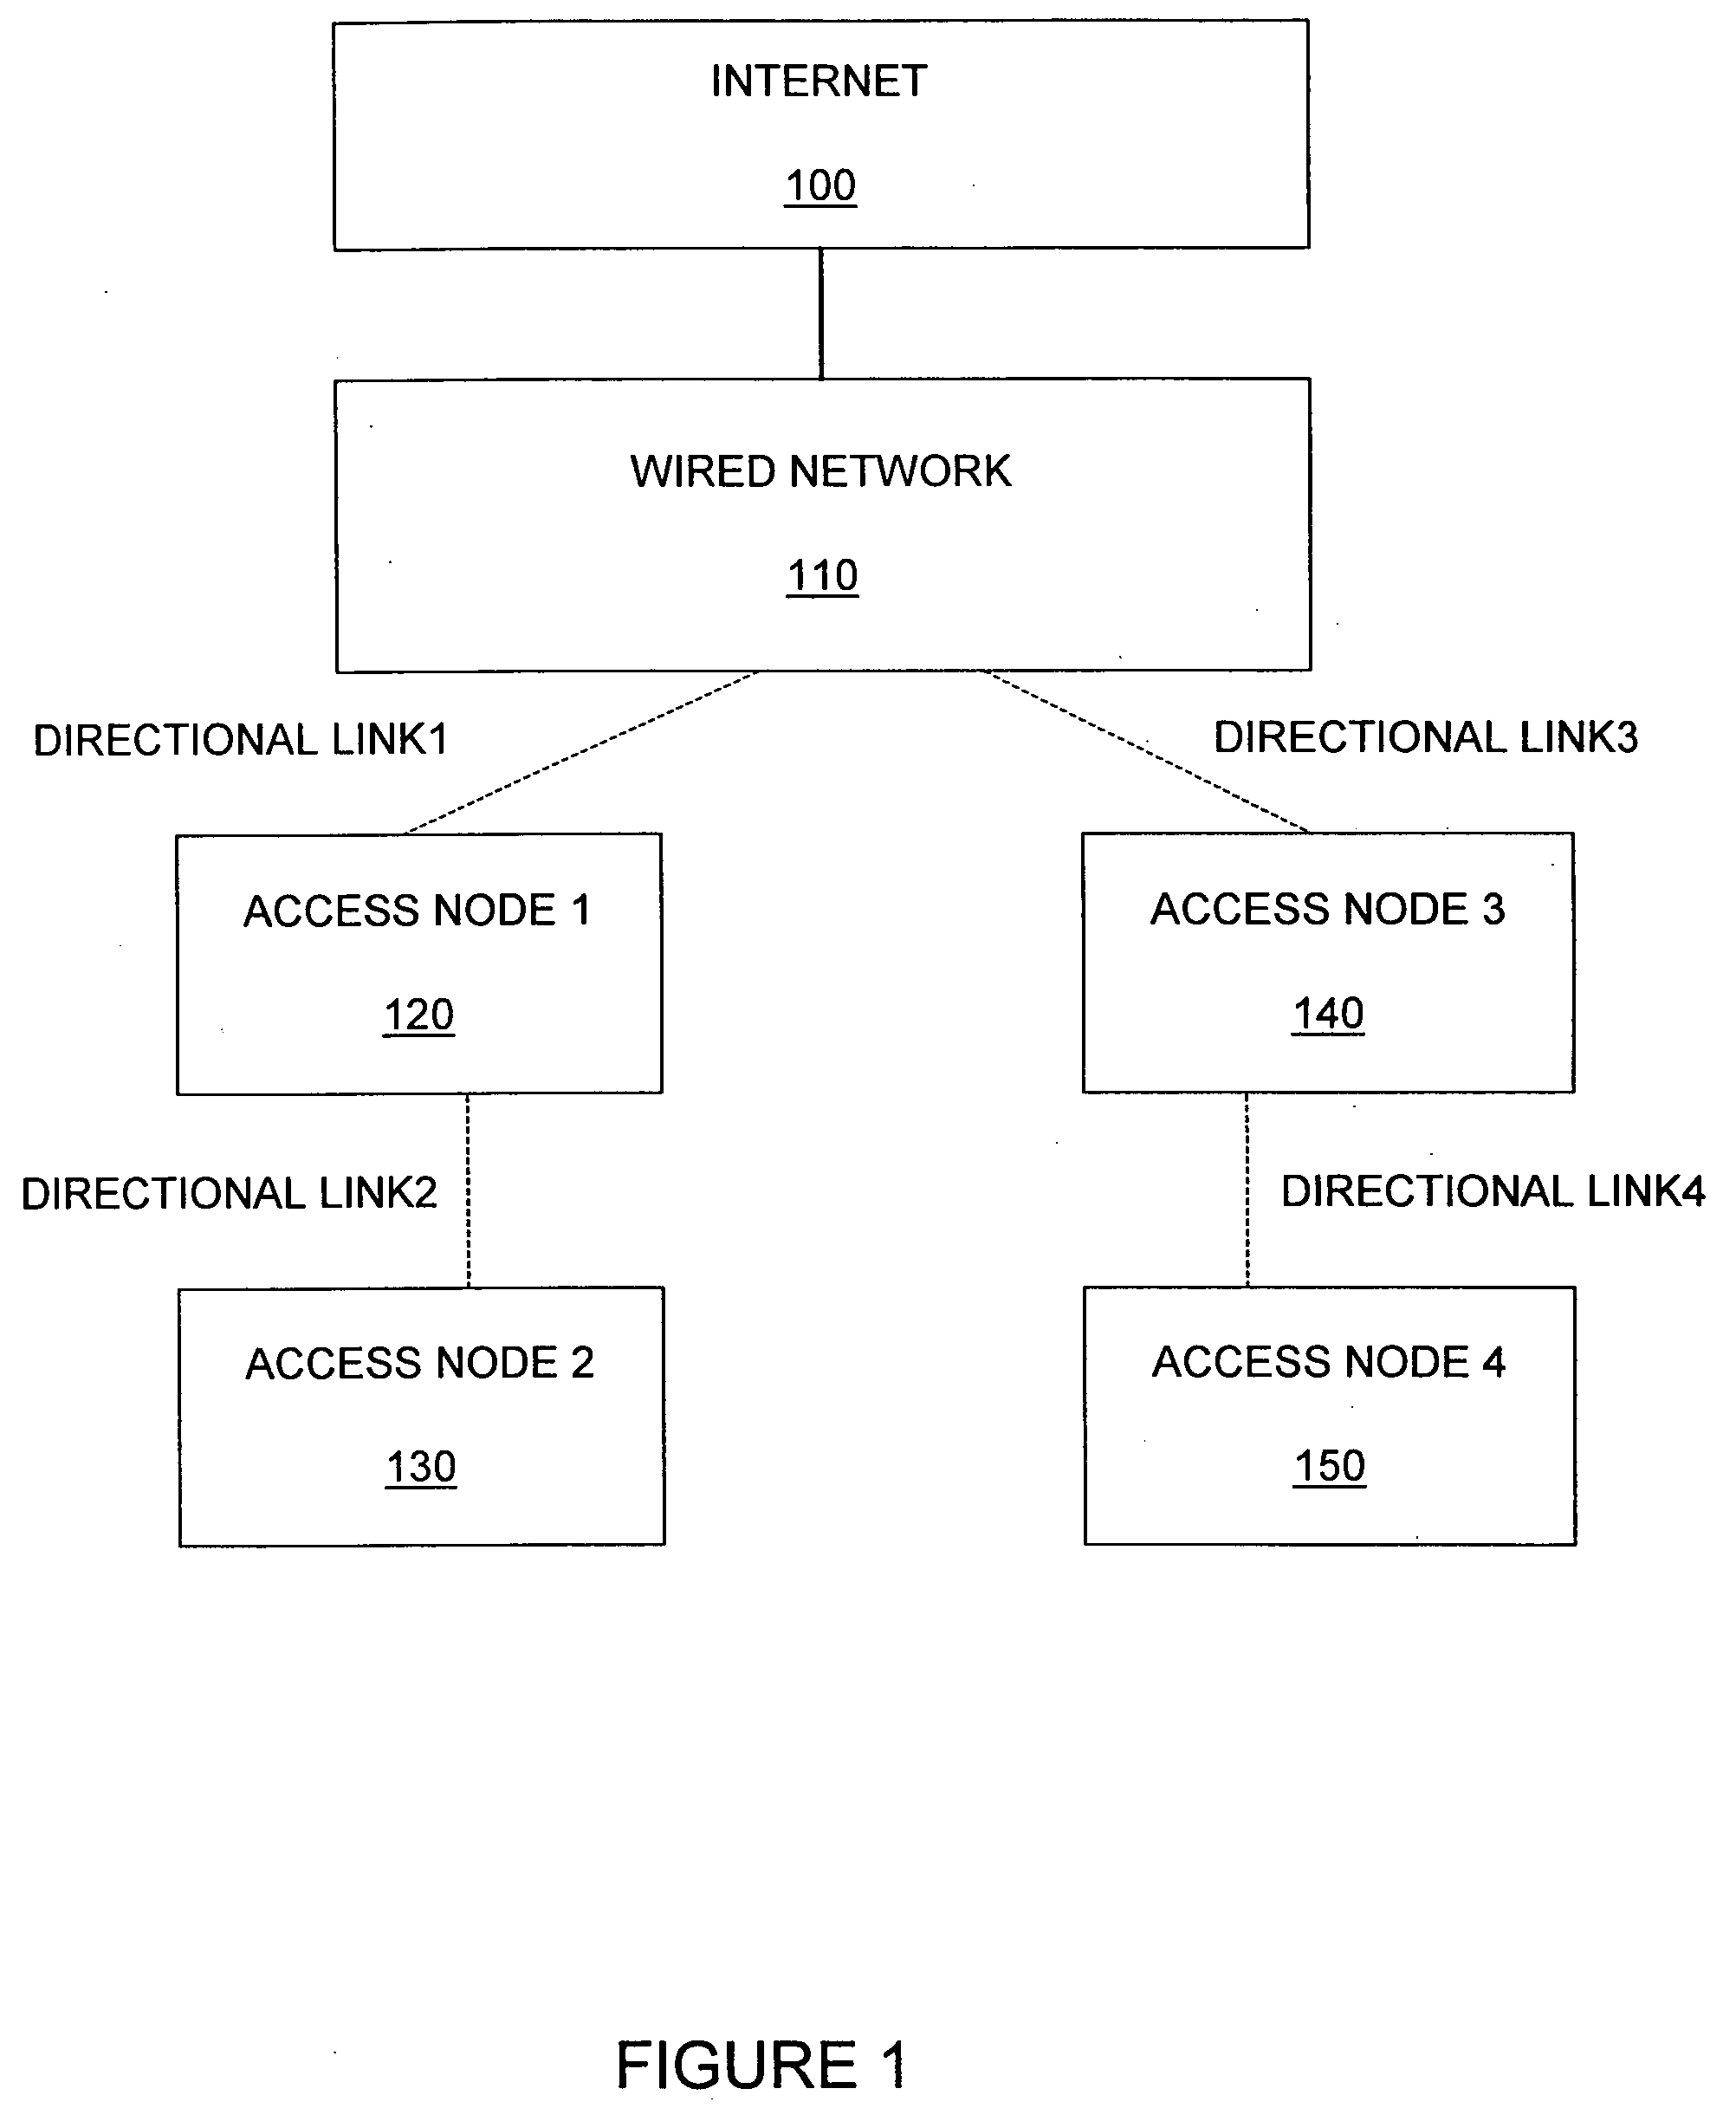 Channel assignments within a mesh network